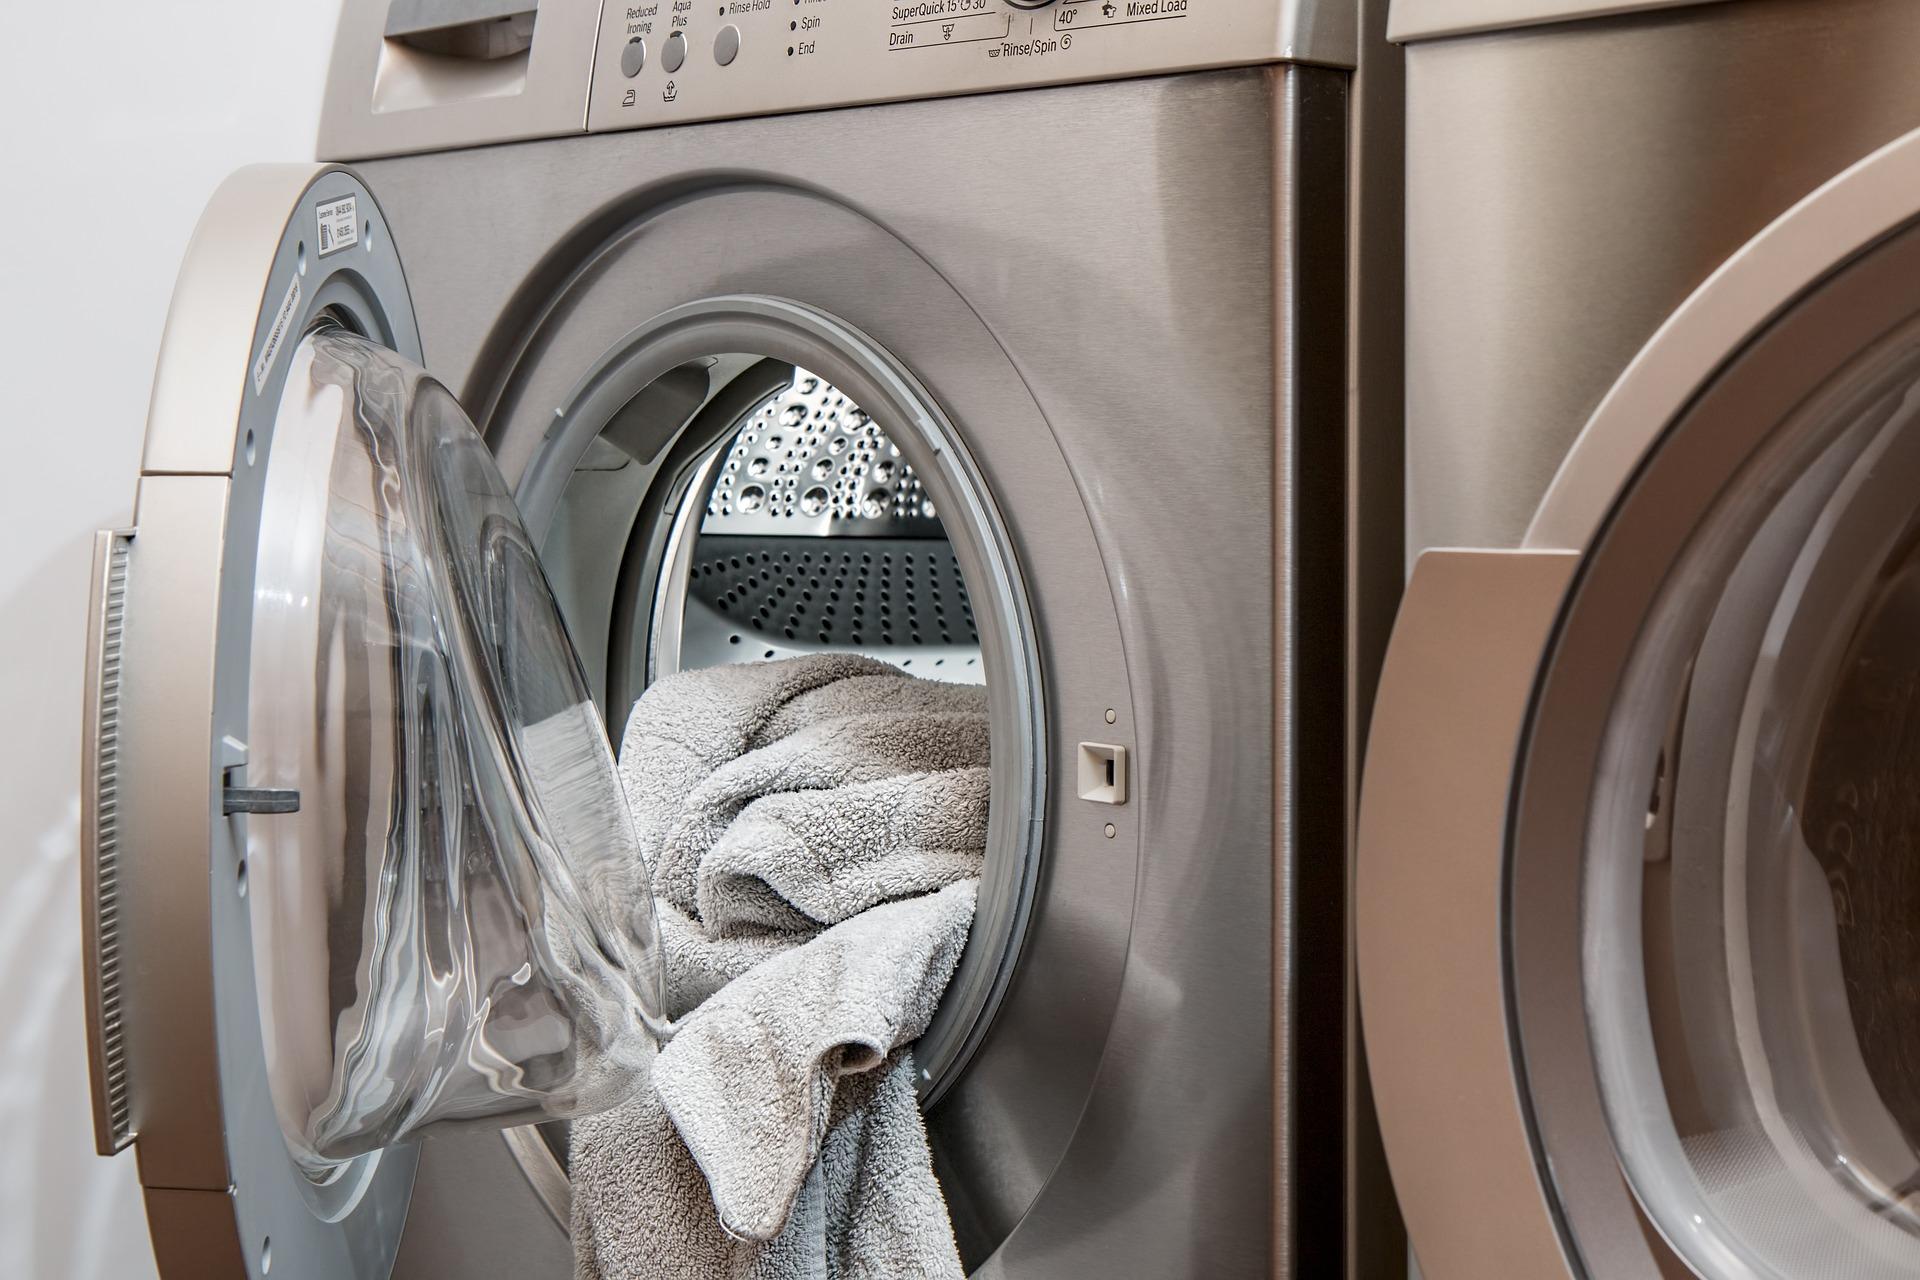 housing allowance.  A washing machine or refrigerator will be deducted from your tax.  See how you do it